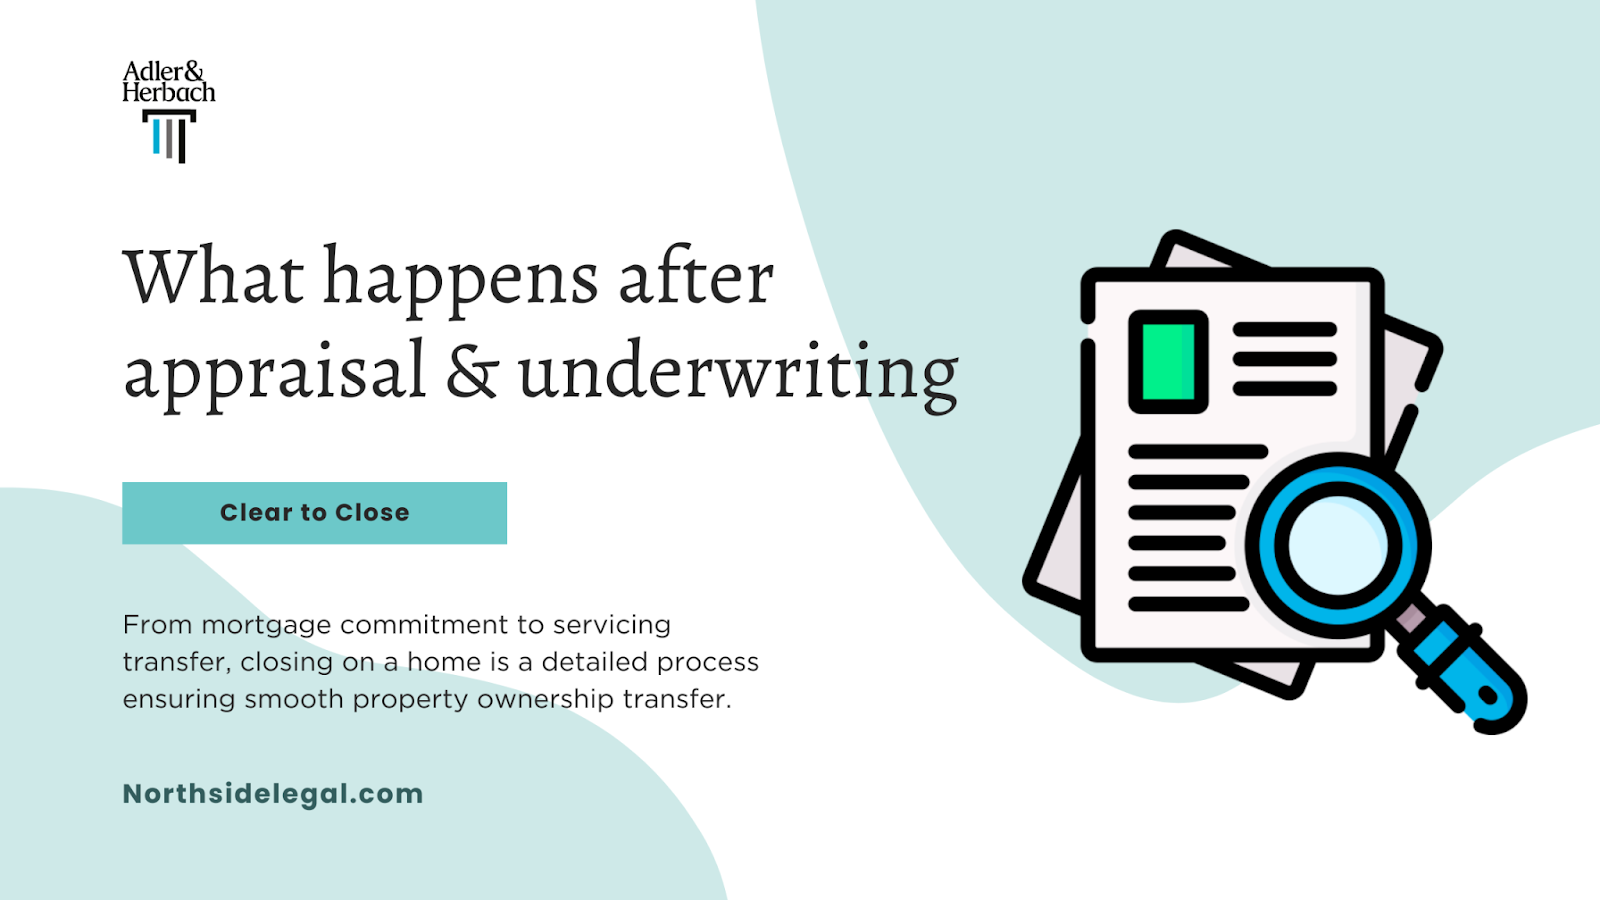 What happens after appraisal and underwriting?